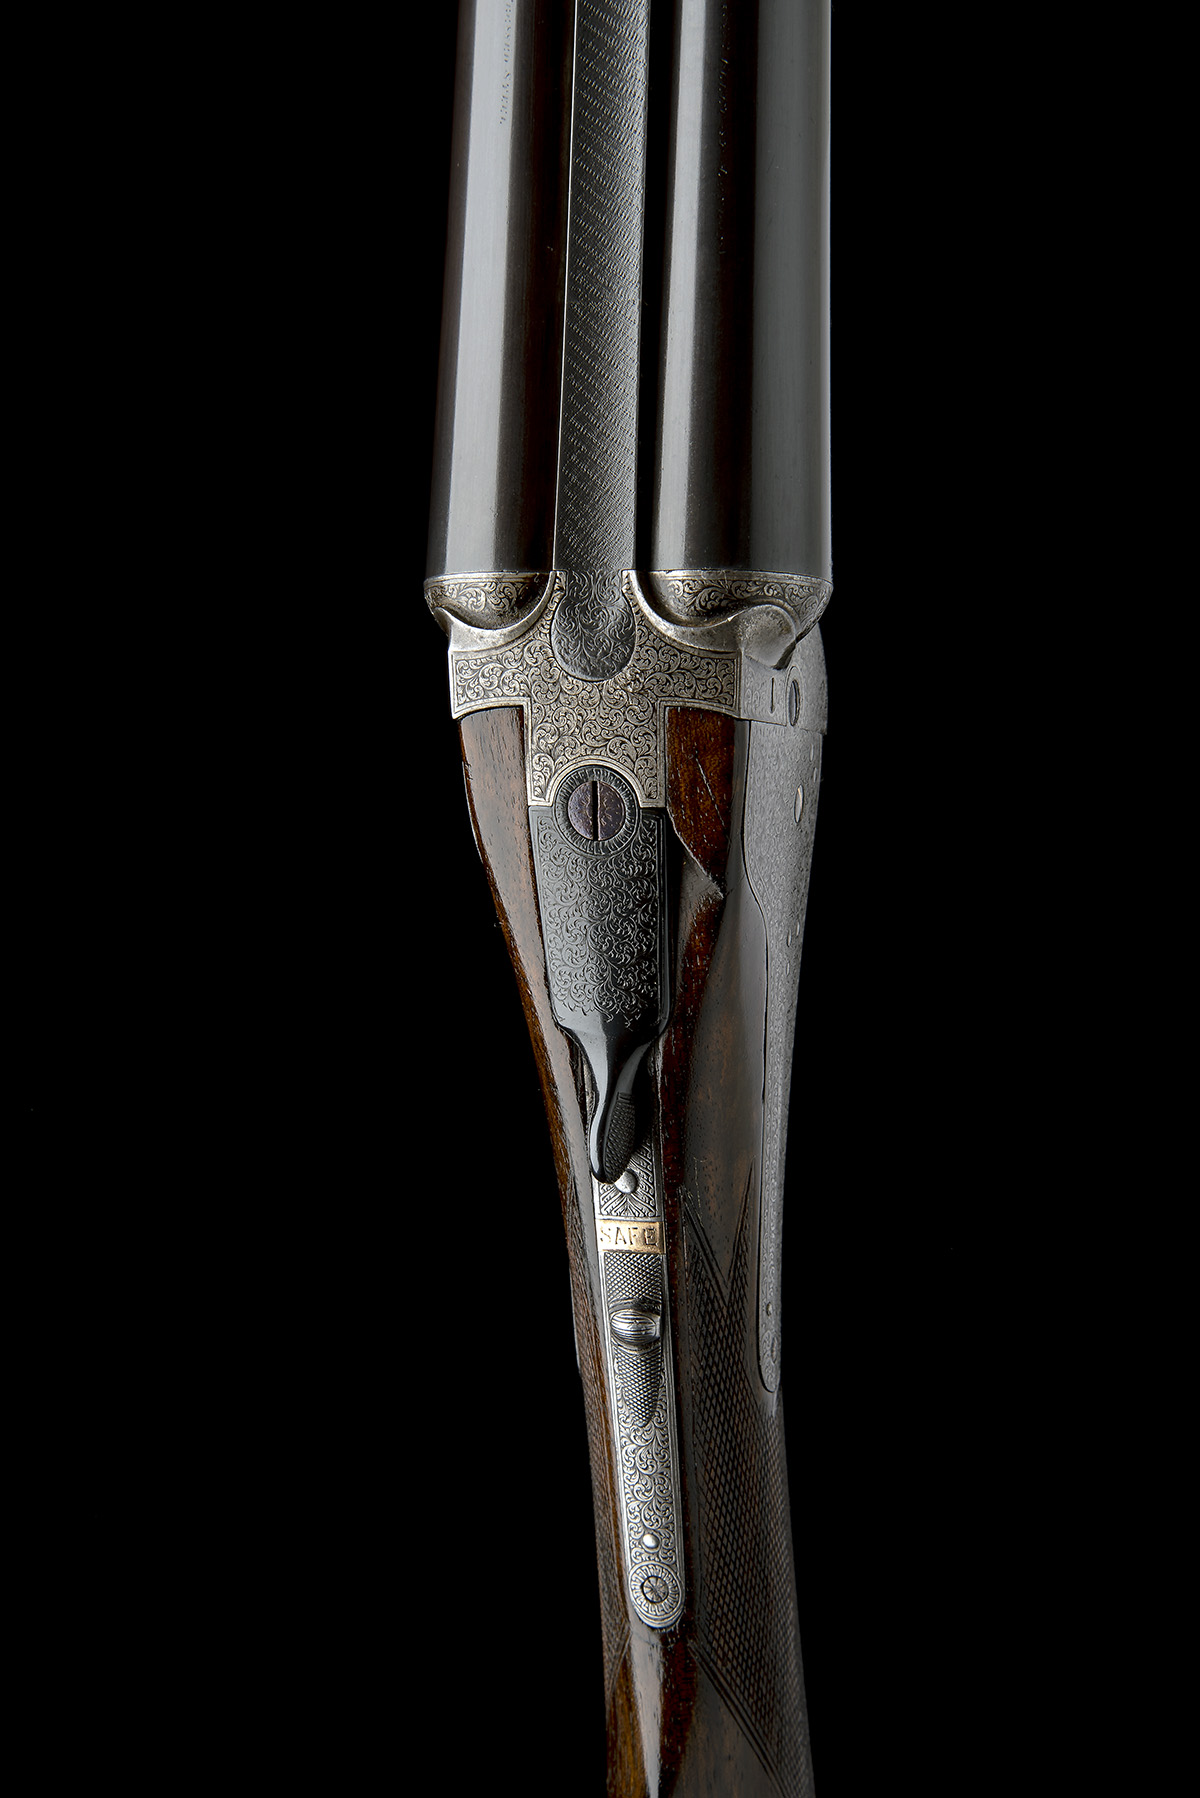 FREDc. T. BAKER A 12-BORE NEEDHAM 1874 PATENT HAMMERLESS SIDELOCK EJECTOR, serial no. 6749, circa - Image 6 of 13